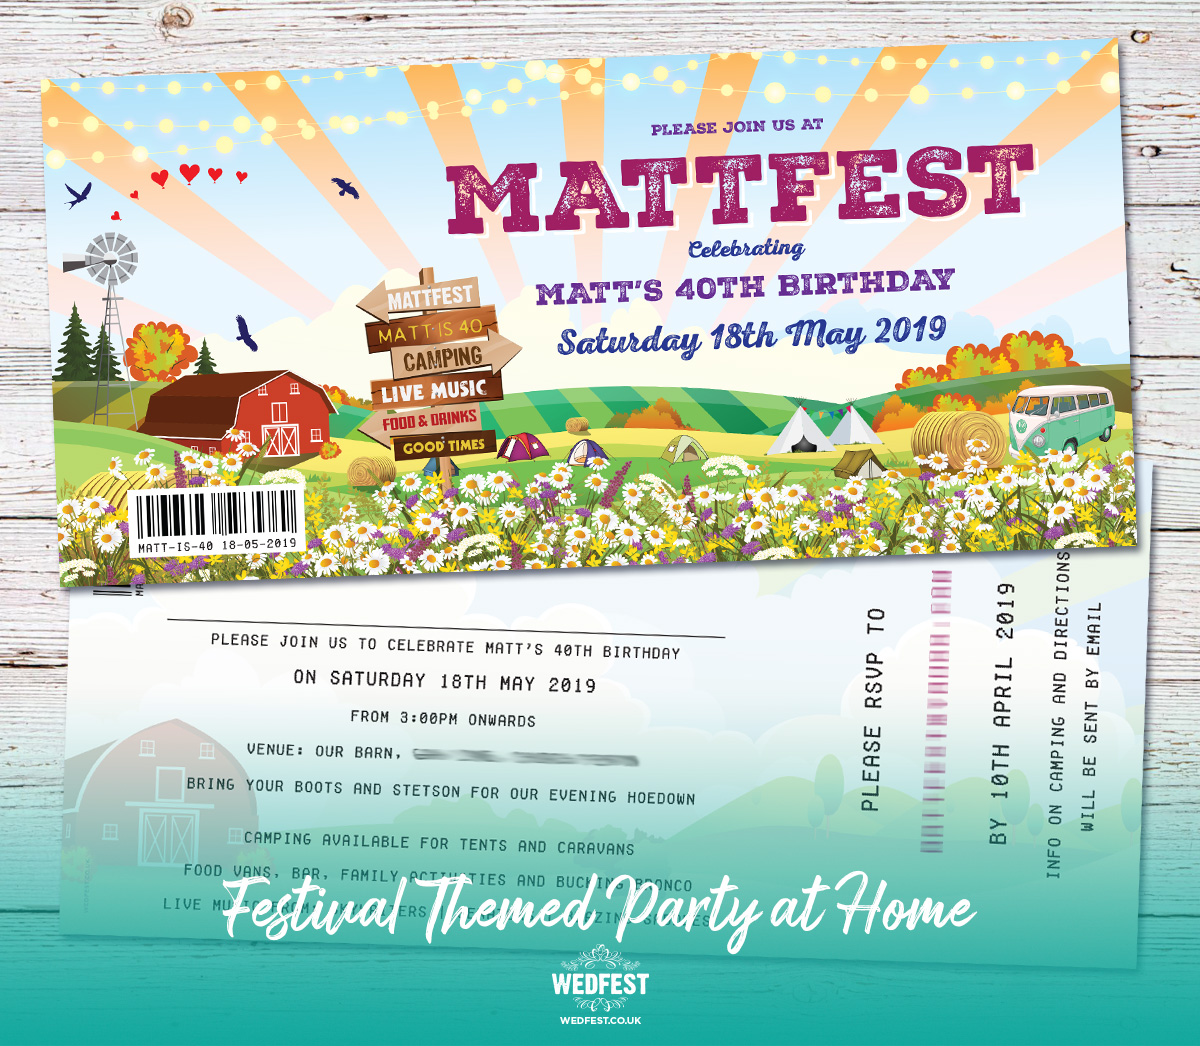 festival themed birthday party at home invitations